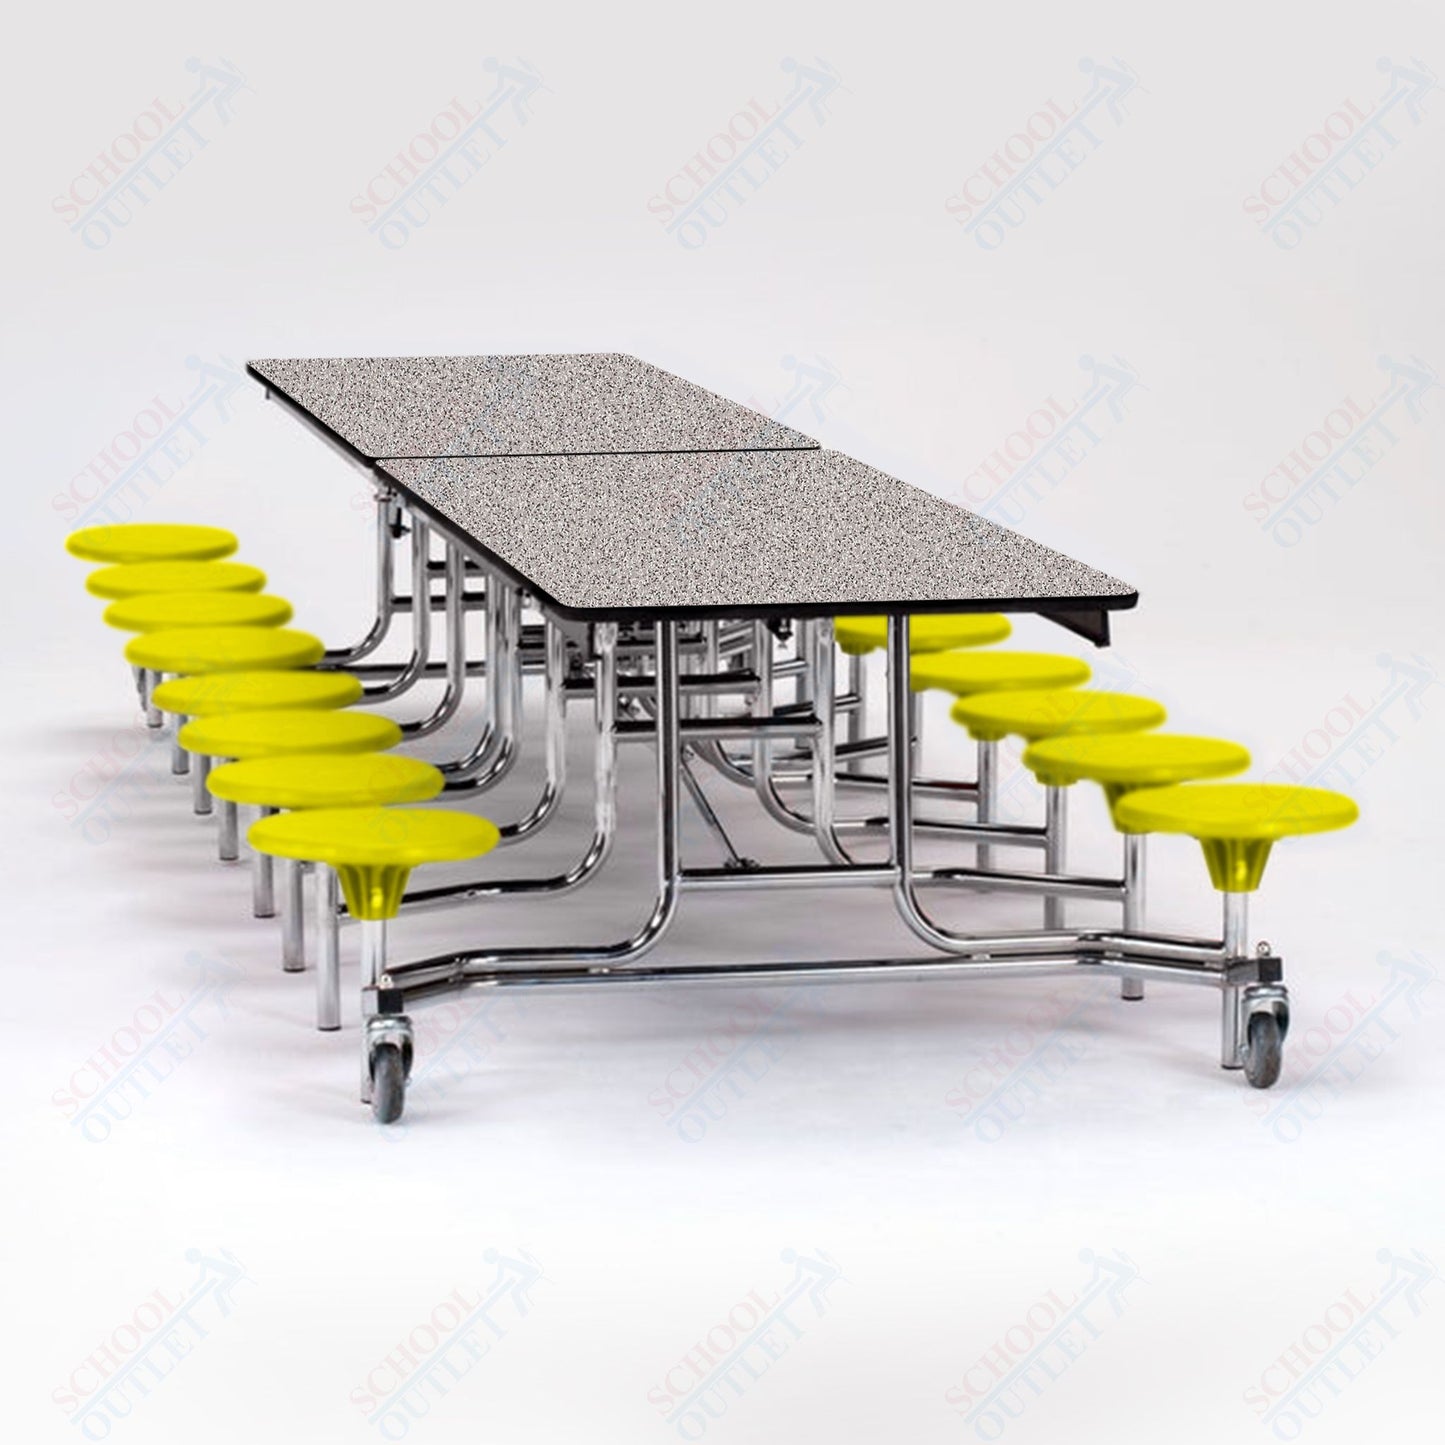 NPS Mobile Cafeteria Table - 30" W x 12' L - 16 Stools - Plywood Core - T-Molding Edge - Chrome Frame